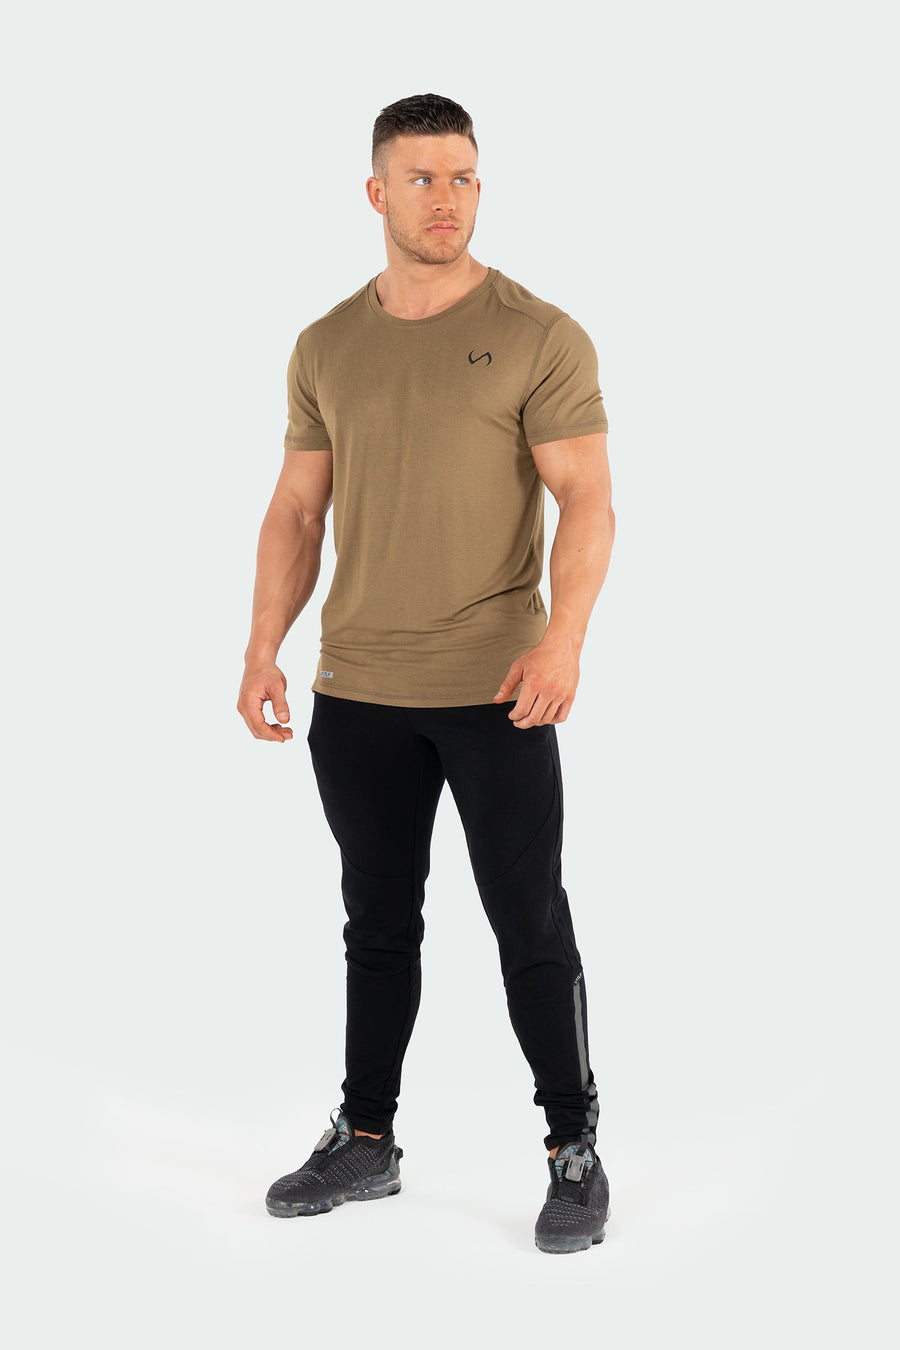 TLF Root Performance Bamboo Crew Neck - Men Short sleeves - Olive -  Green - 6